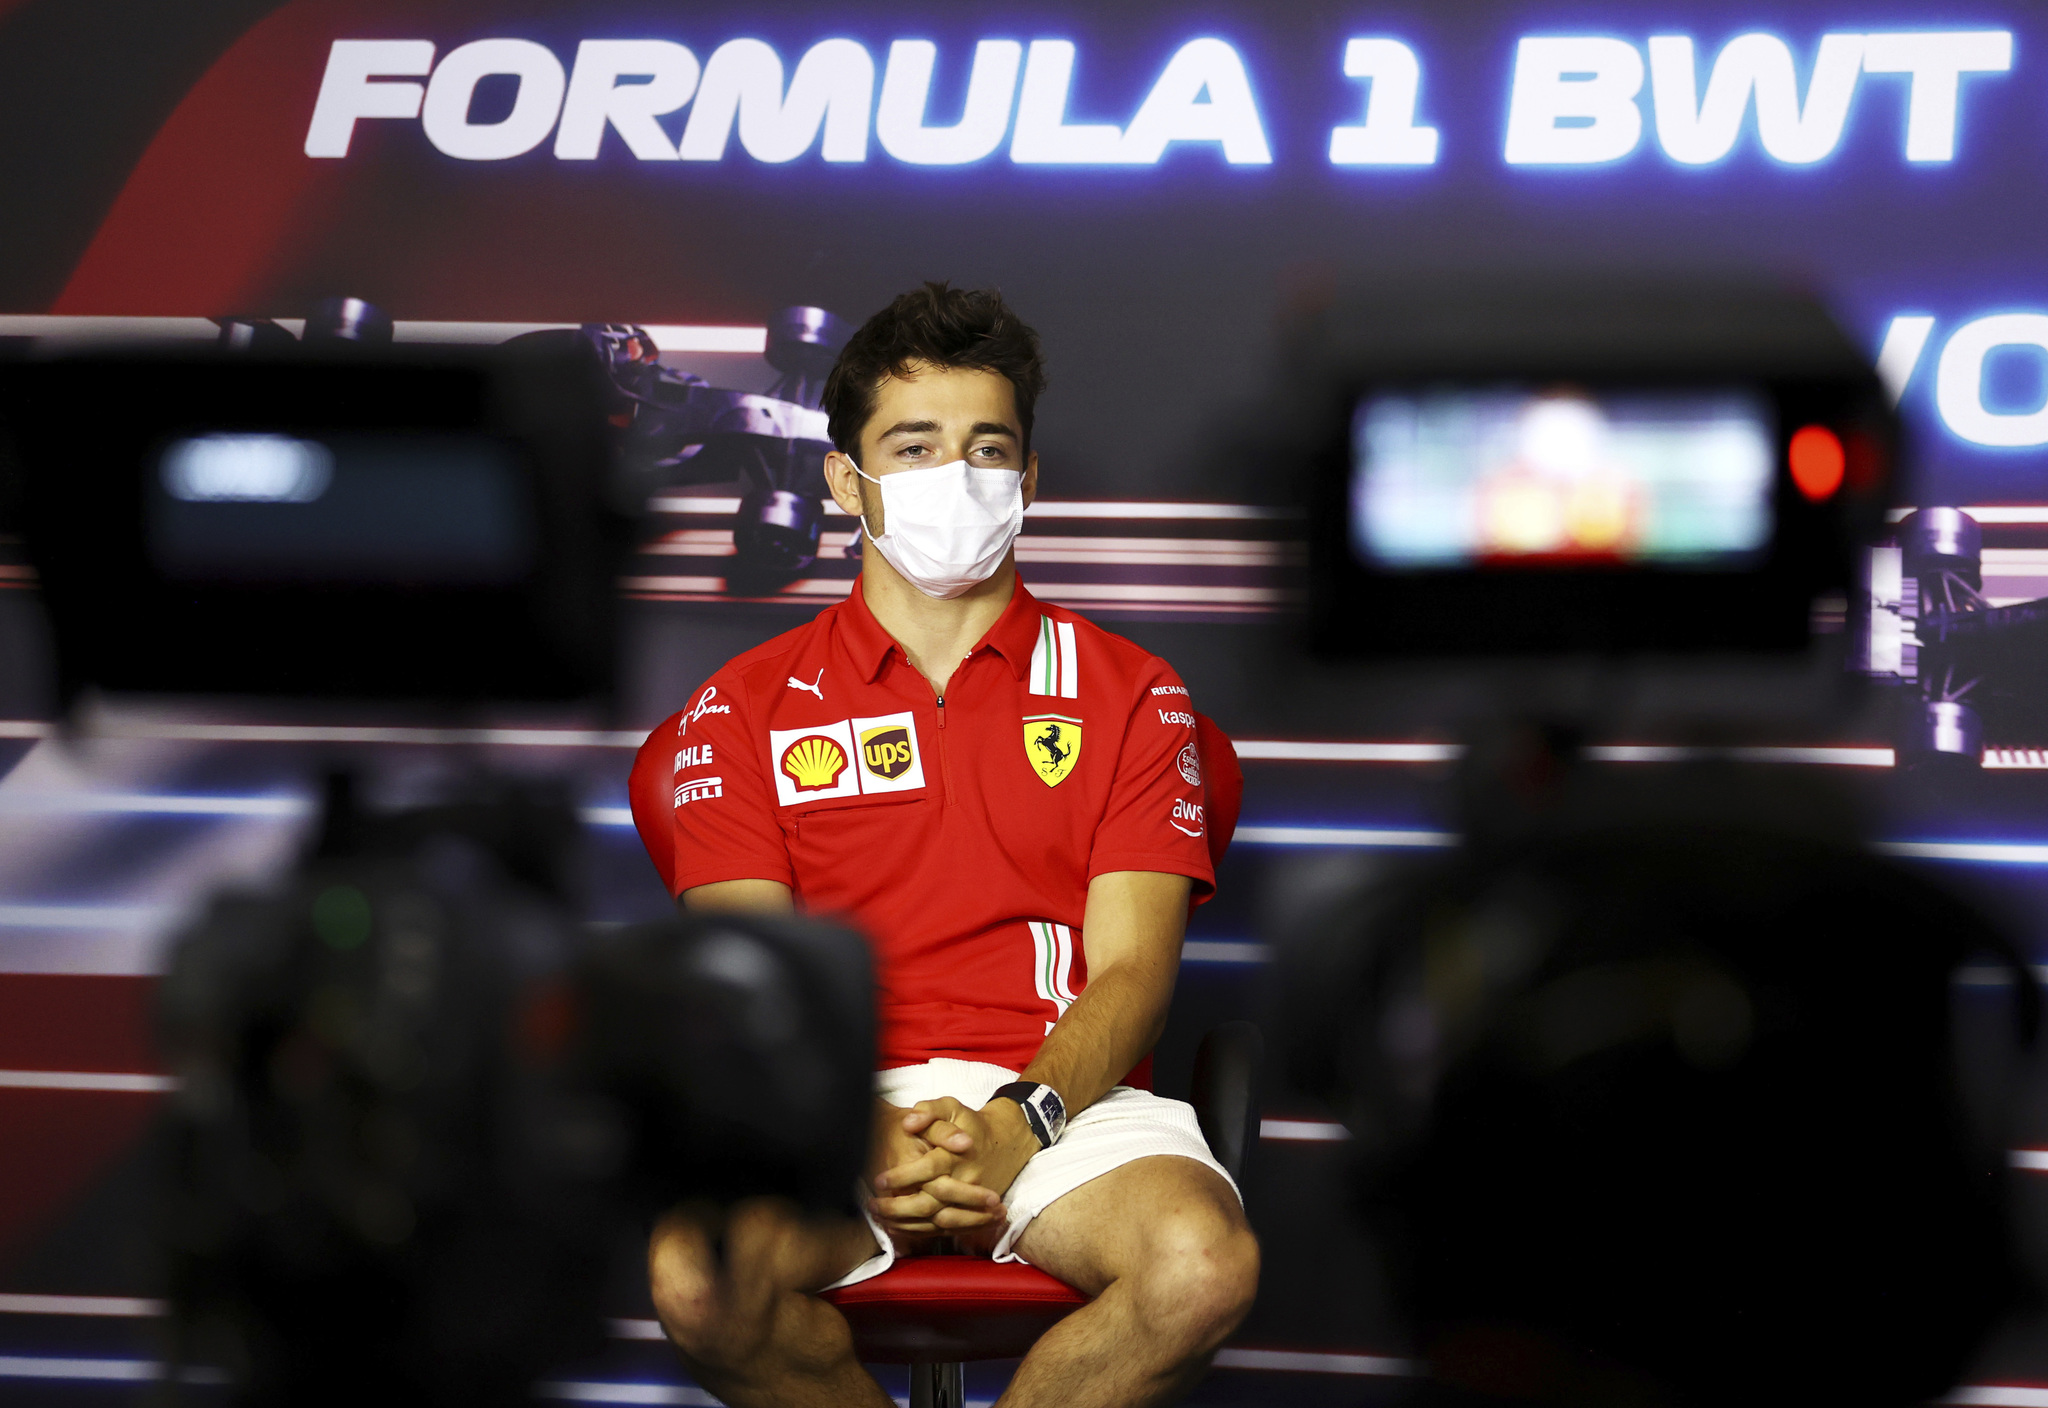 Ferrari driver Charles lt;HIT gt;Leclerc lt;/HIT gt; of Monaco attends a media conference ahead of the Austrian Formula One Grand Prix at the Red Bull Ring racetrack in Spielberg, Austria, Thursday, July 1, 2021. (Bryn Lennon/Pool Photo via AP)